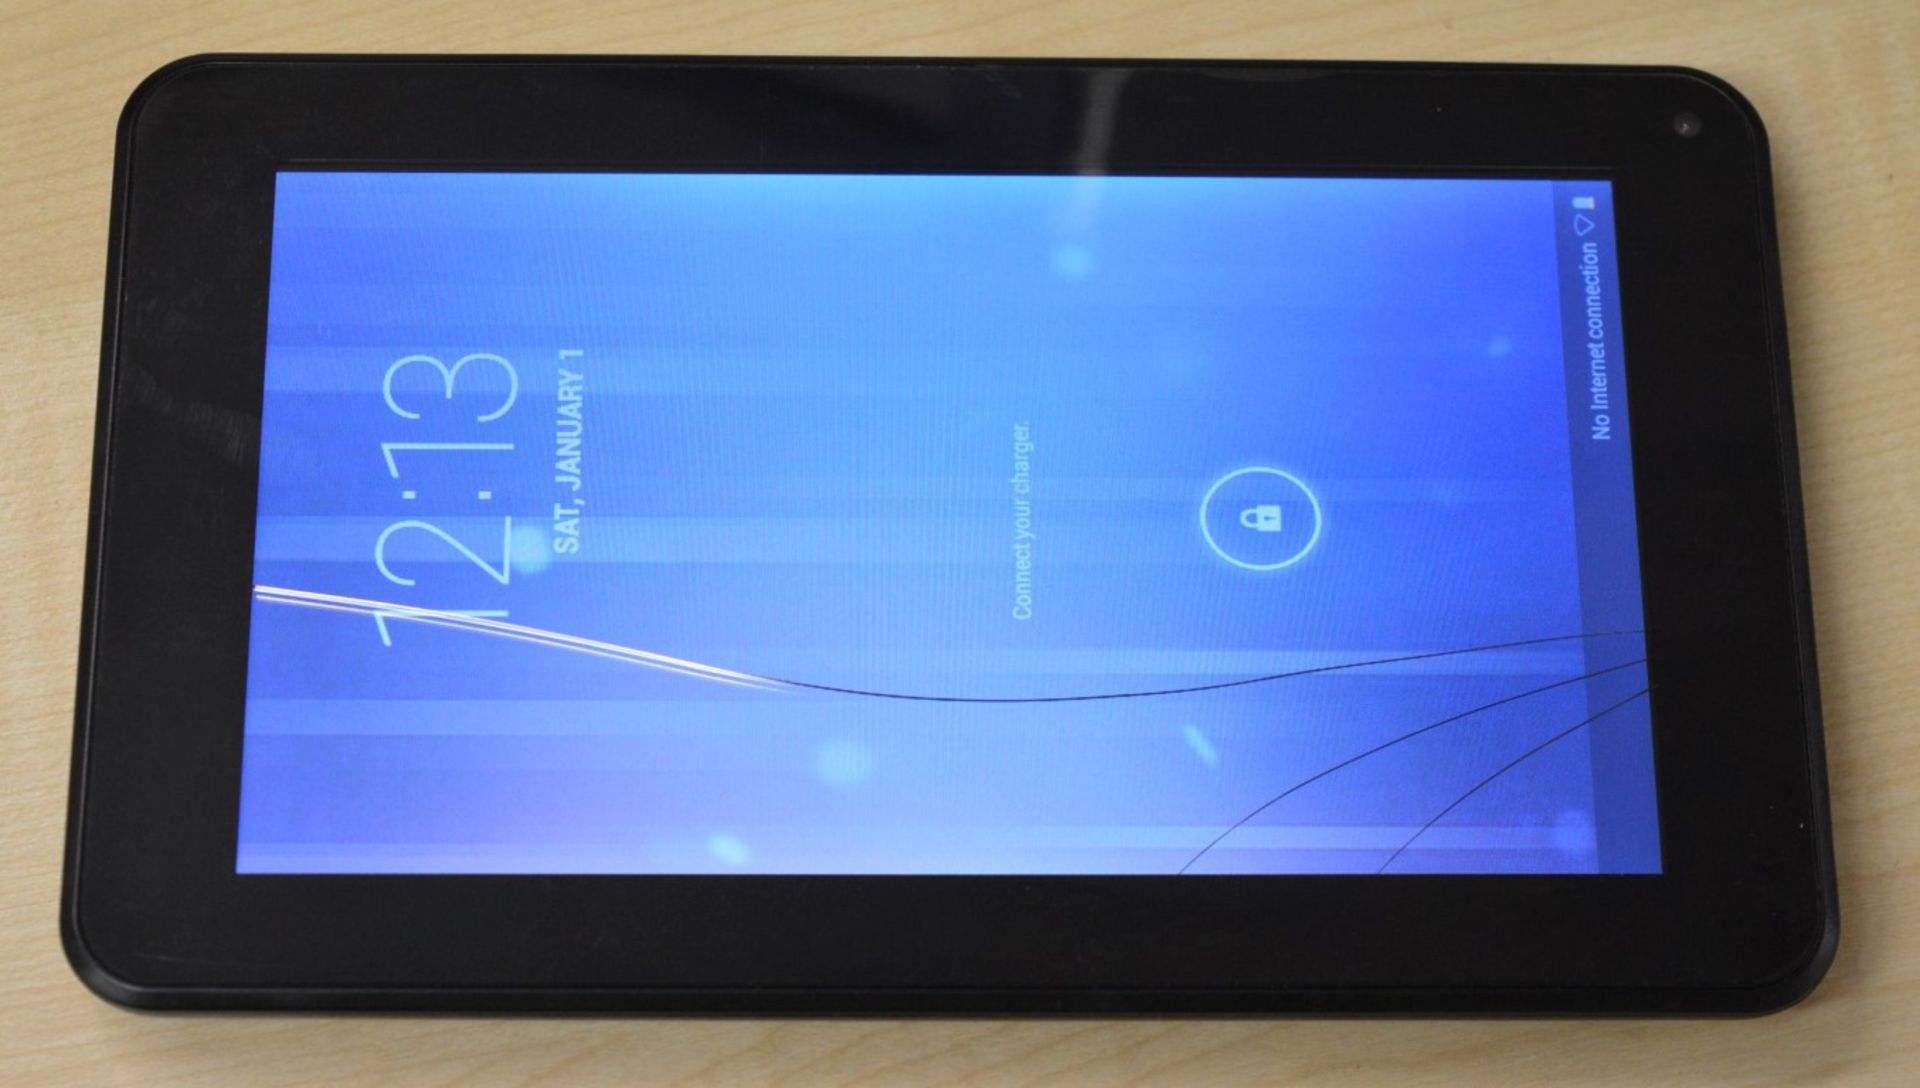 1 x Artech 7 Inch Tablet Computer - Spares or Repairs - Cracked Screen - 1ghz Processor, 512mb Ram, - Image 4 of 6